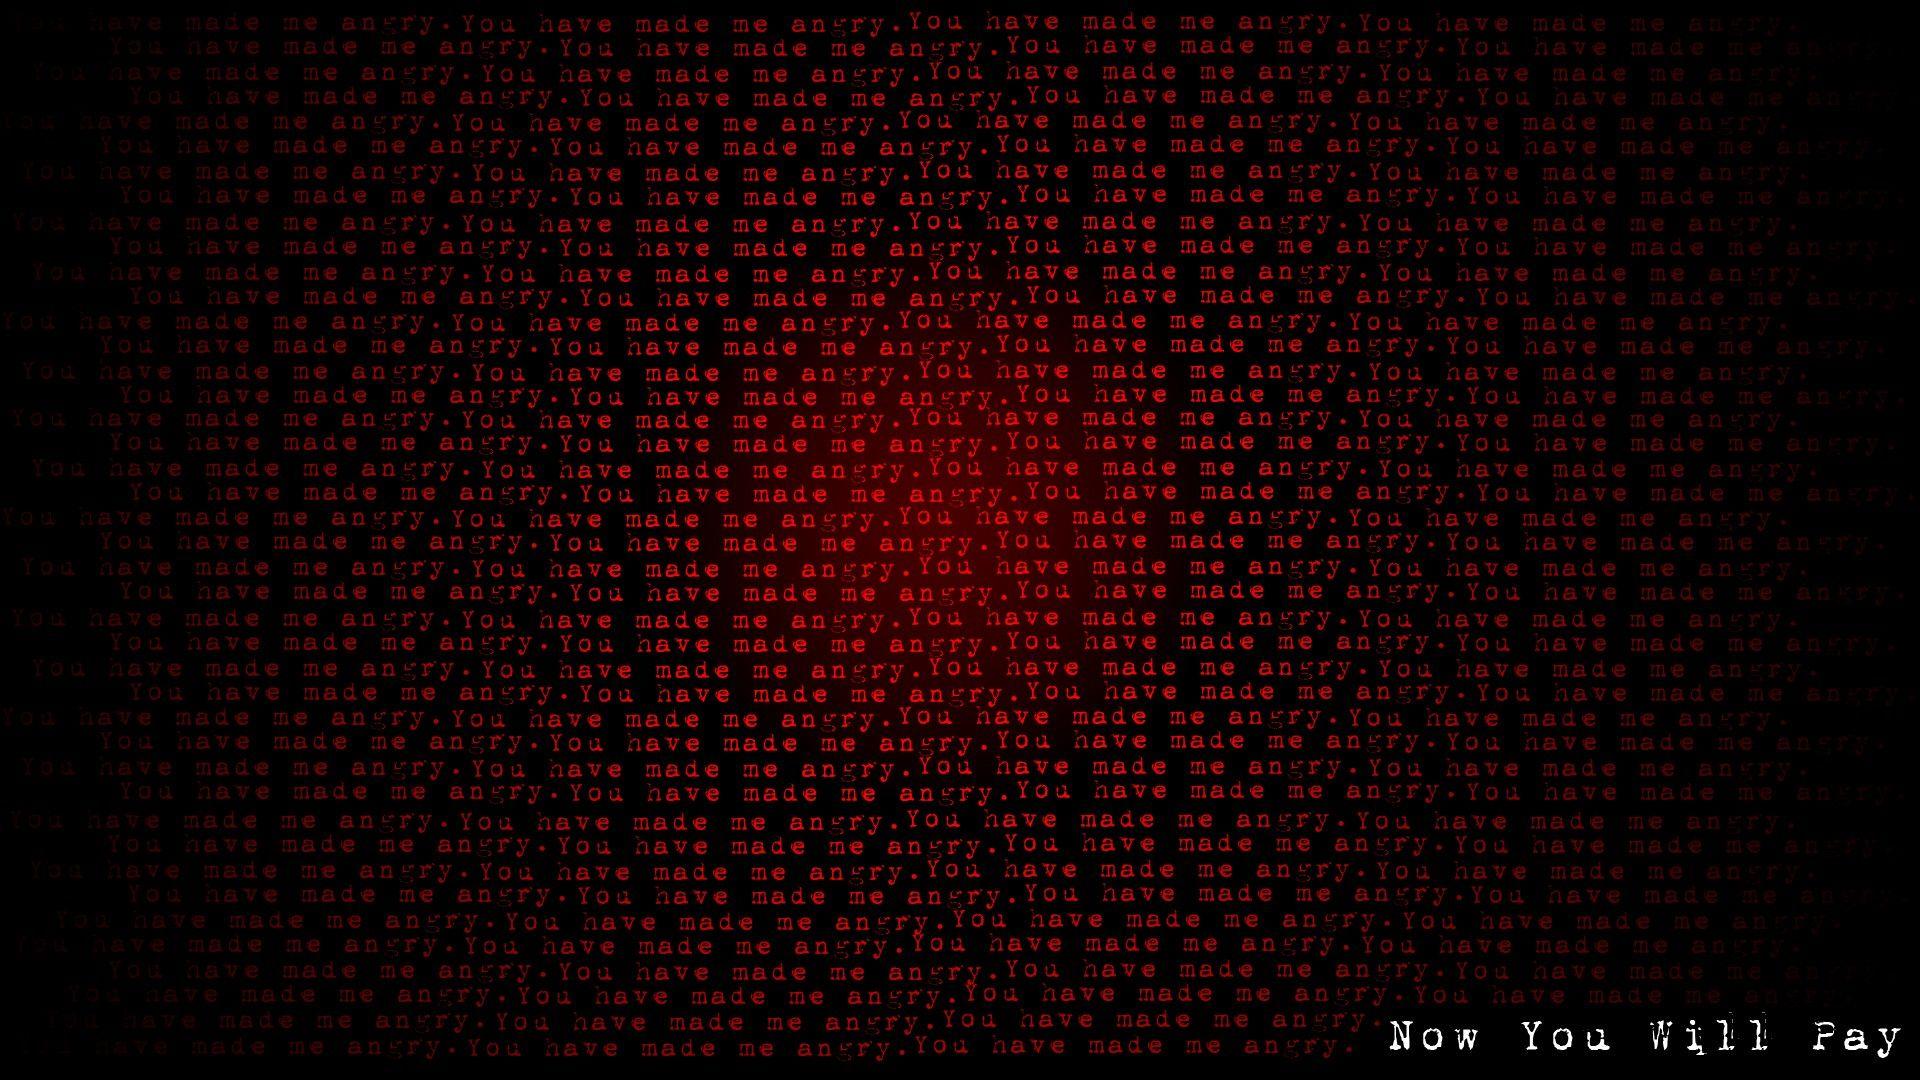 black and red wallpaper